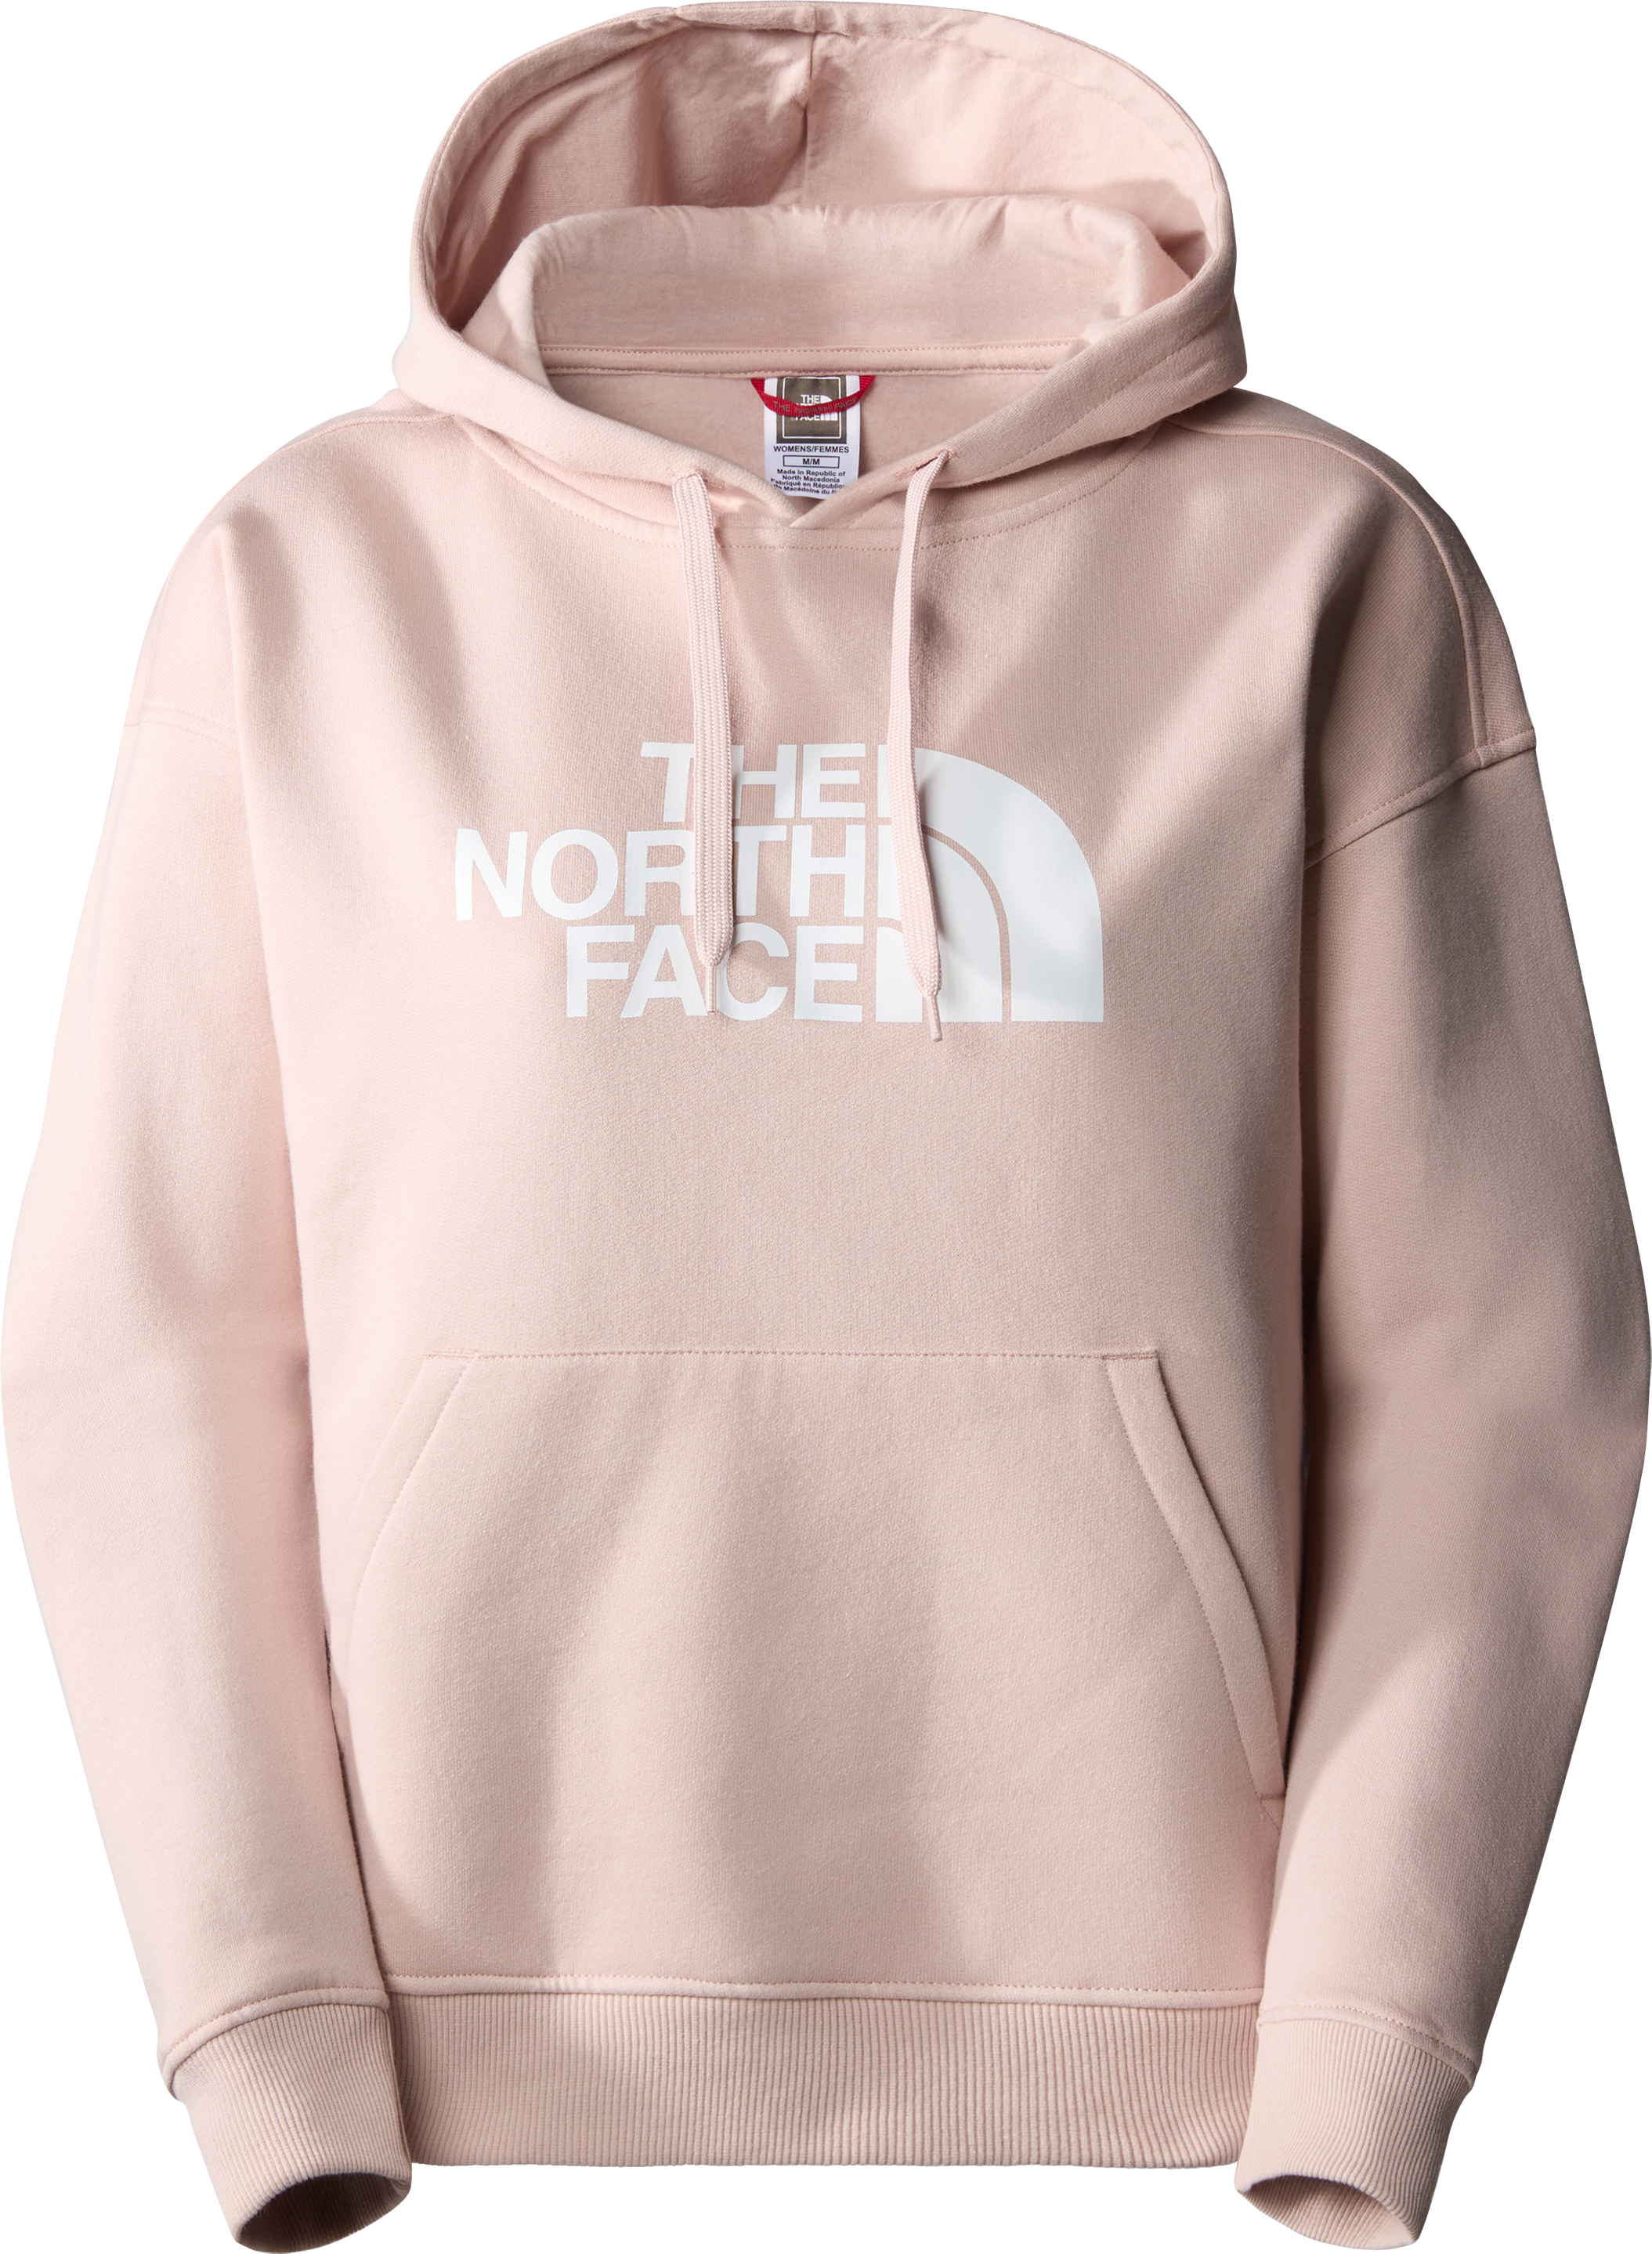 The North Face The North Face Women's Light Drew Peak Hoodie Pink Moss XS, PINK MOSS